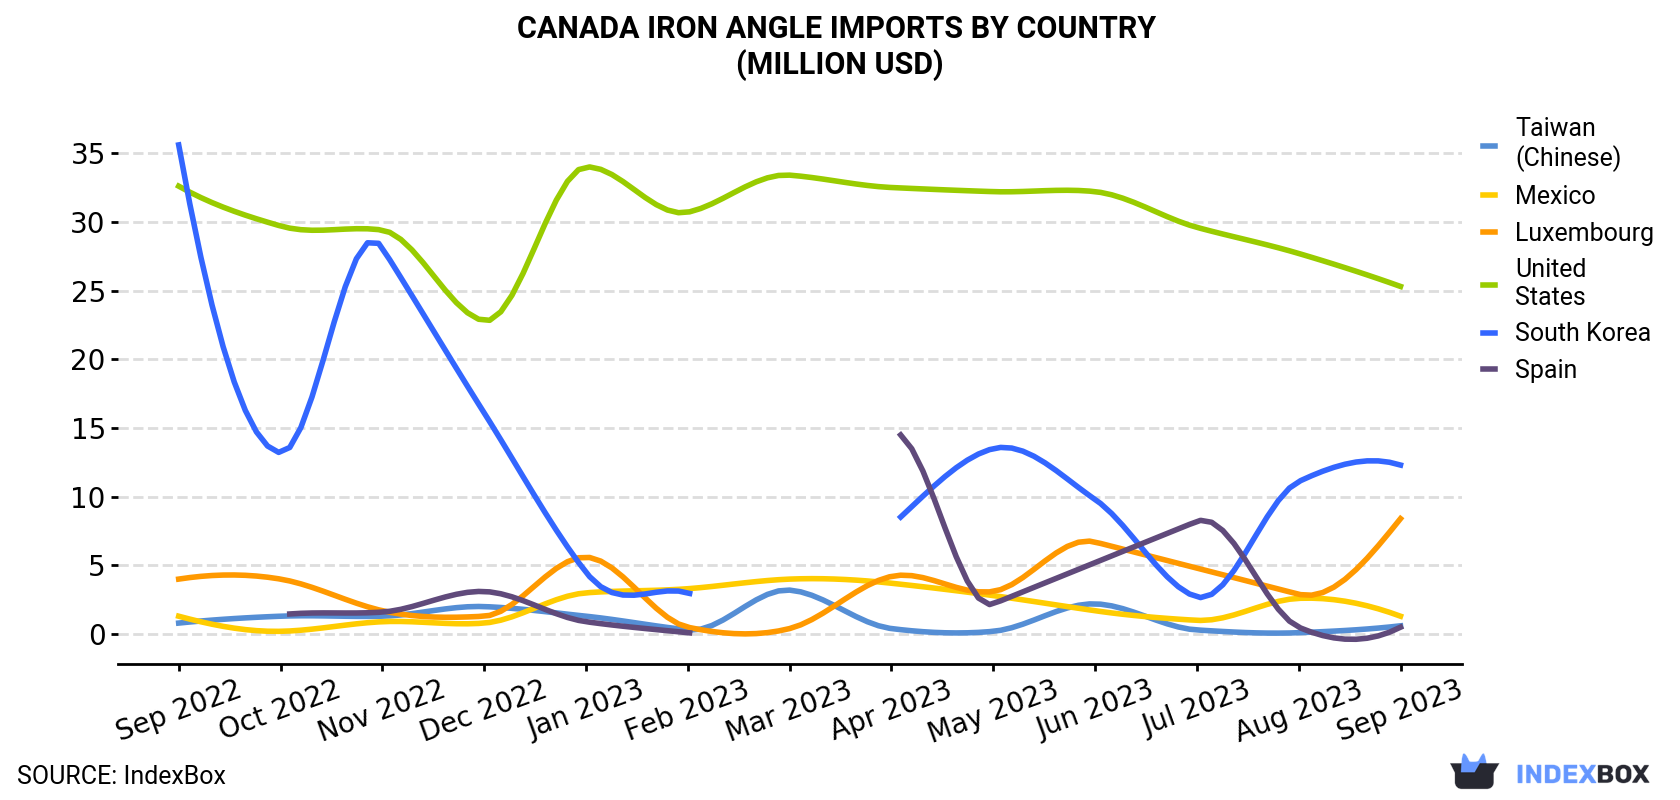 Canada Iron Angle Imports By Country (Million USD)